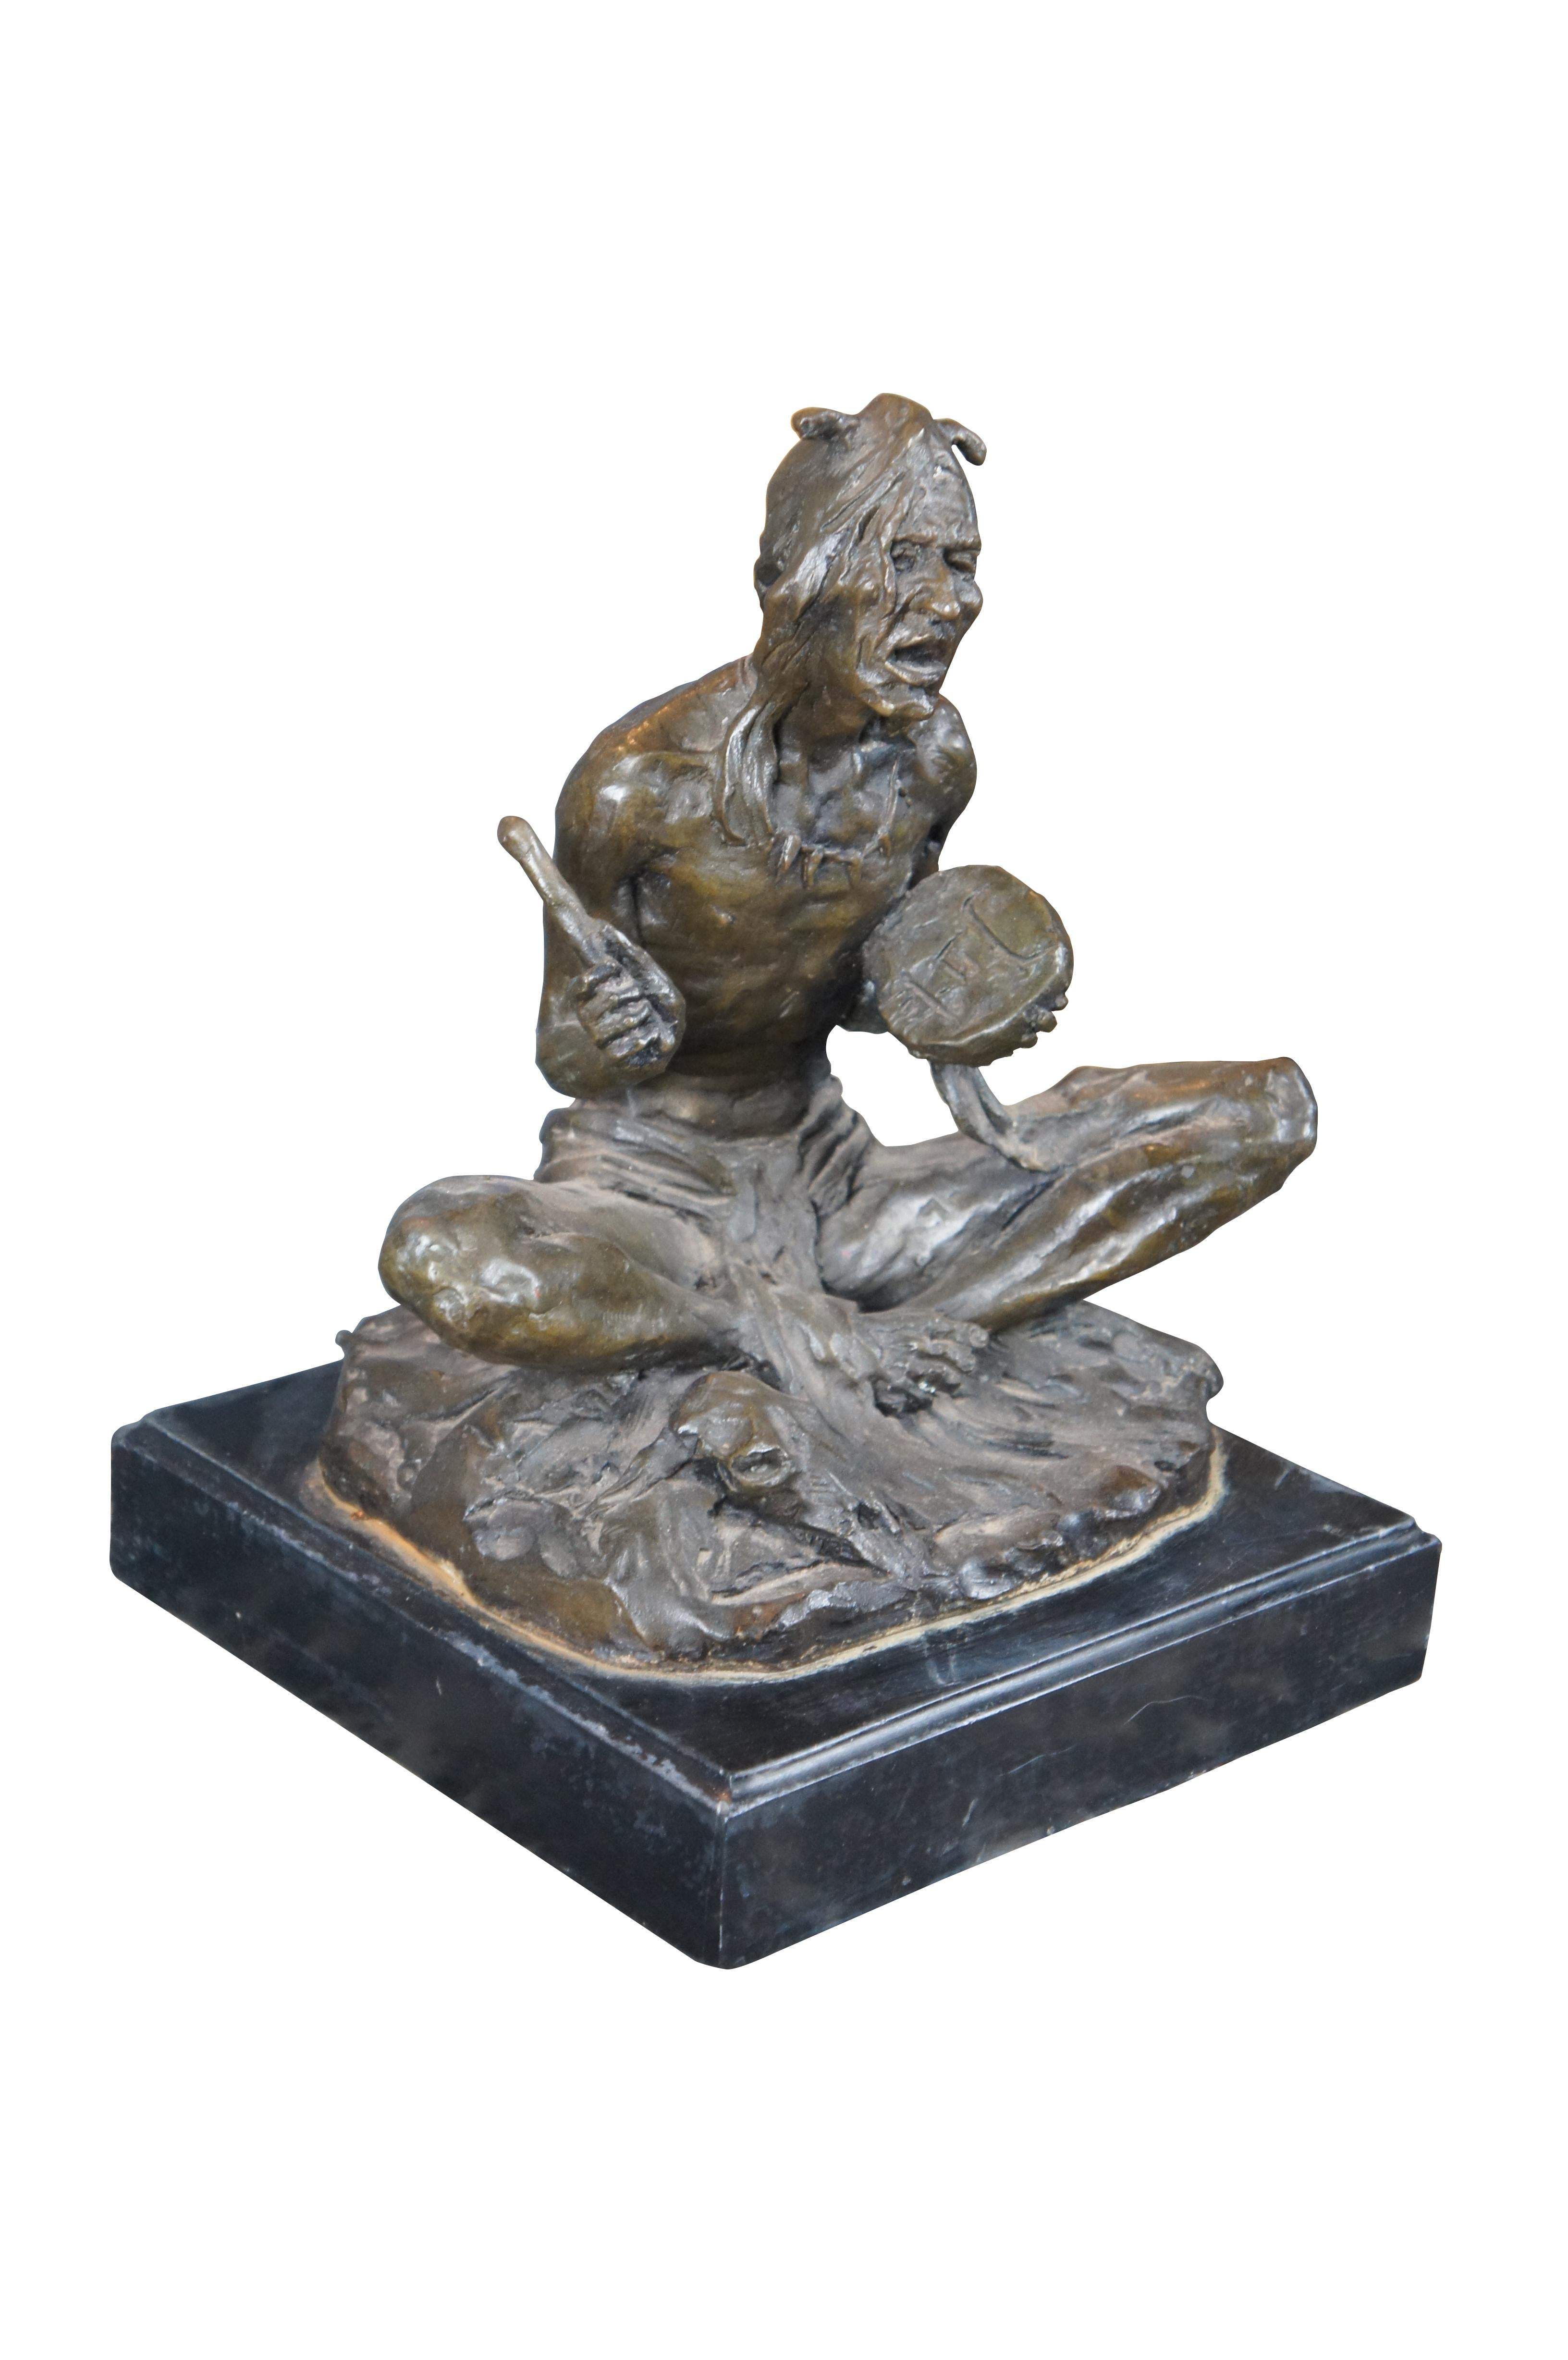 A 20th Century bronze featuring a Native American Chief sitting Indian style while playing the drum and singing. The chief is sitting next to a cow scull and raised over a plinth base. Signed by Jon Rubin

Dimensions:
9